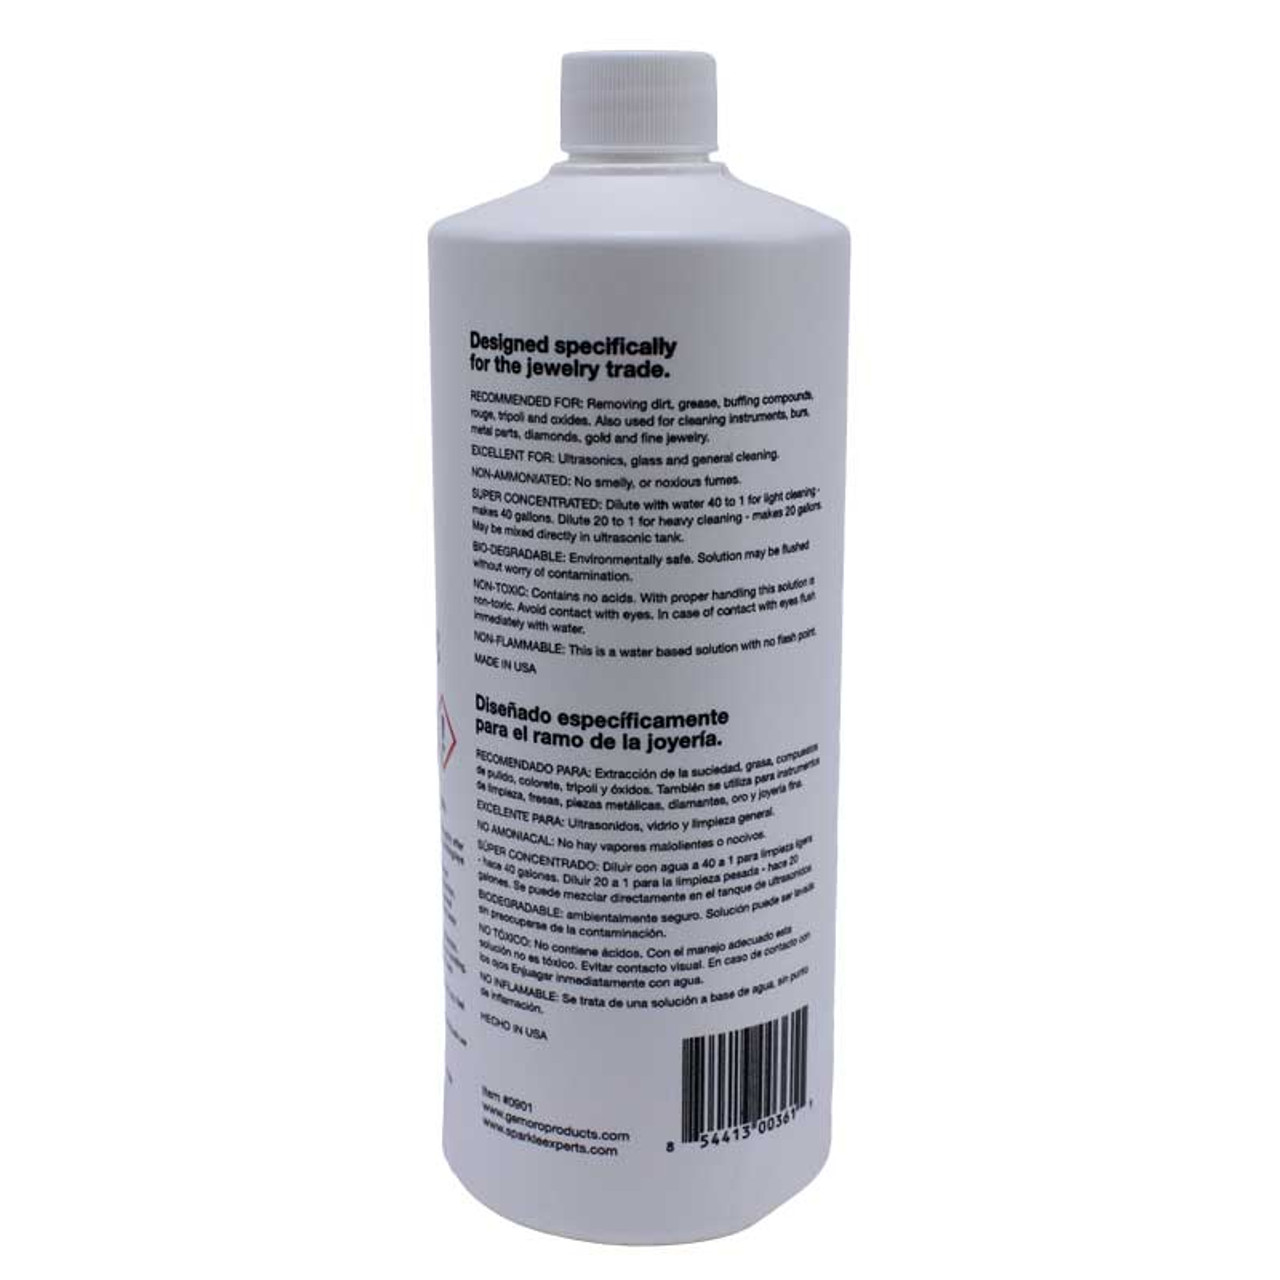 Ultrasonic Jewelry Cleaner Solution Concentrate, 16 Ounces